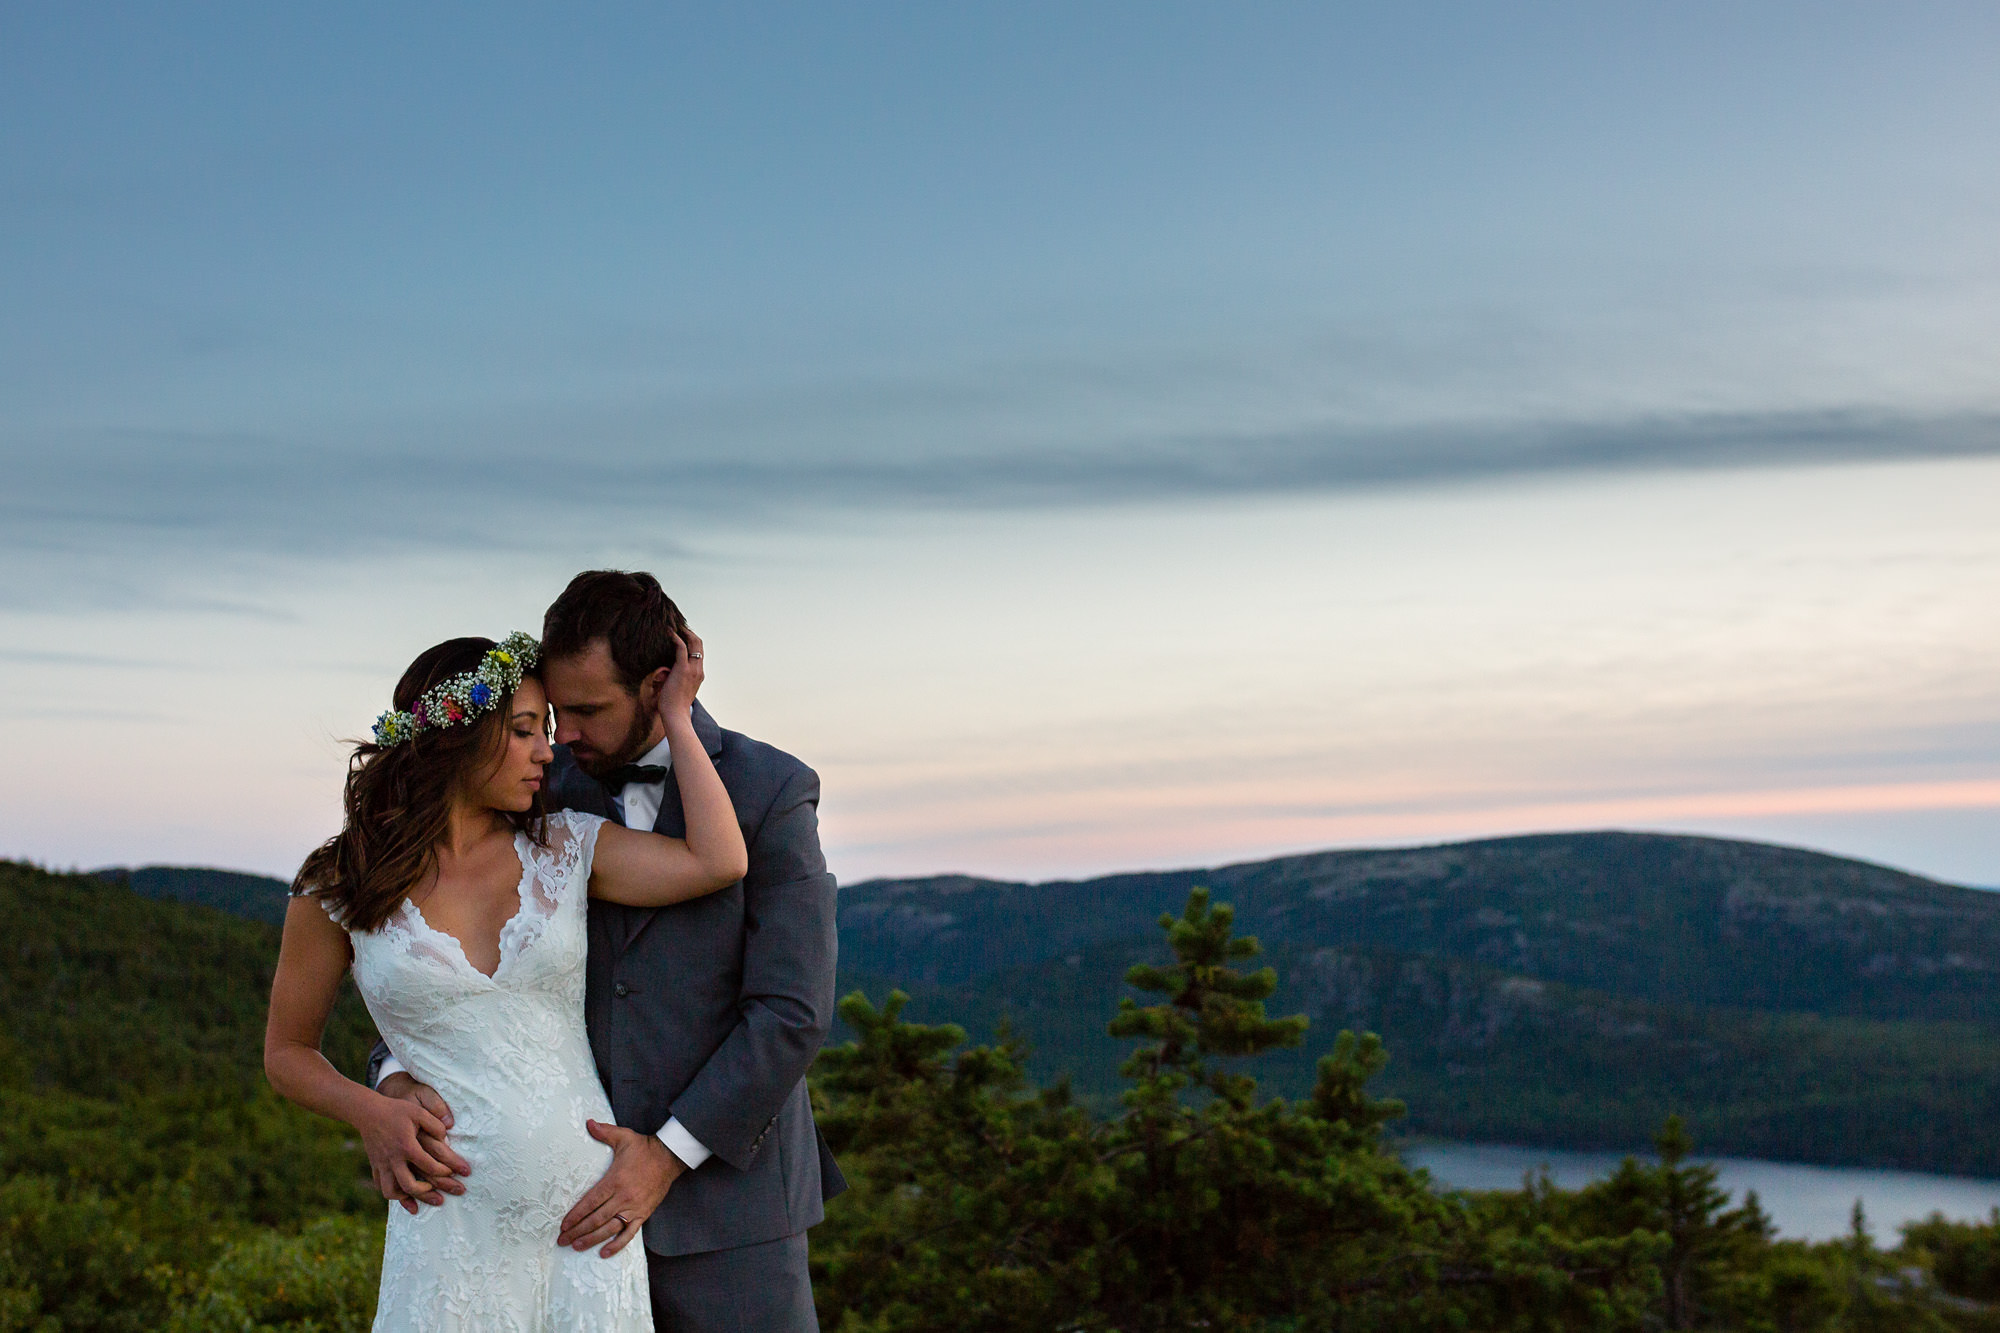 Beautiful elopement photos of a bride and groom on Cadillac Mountain